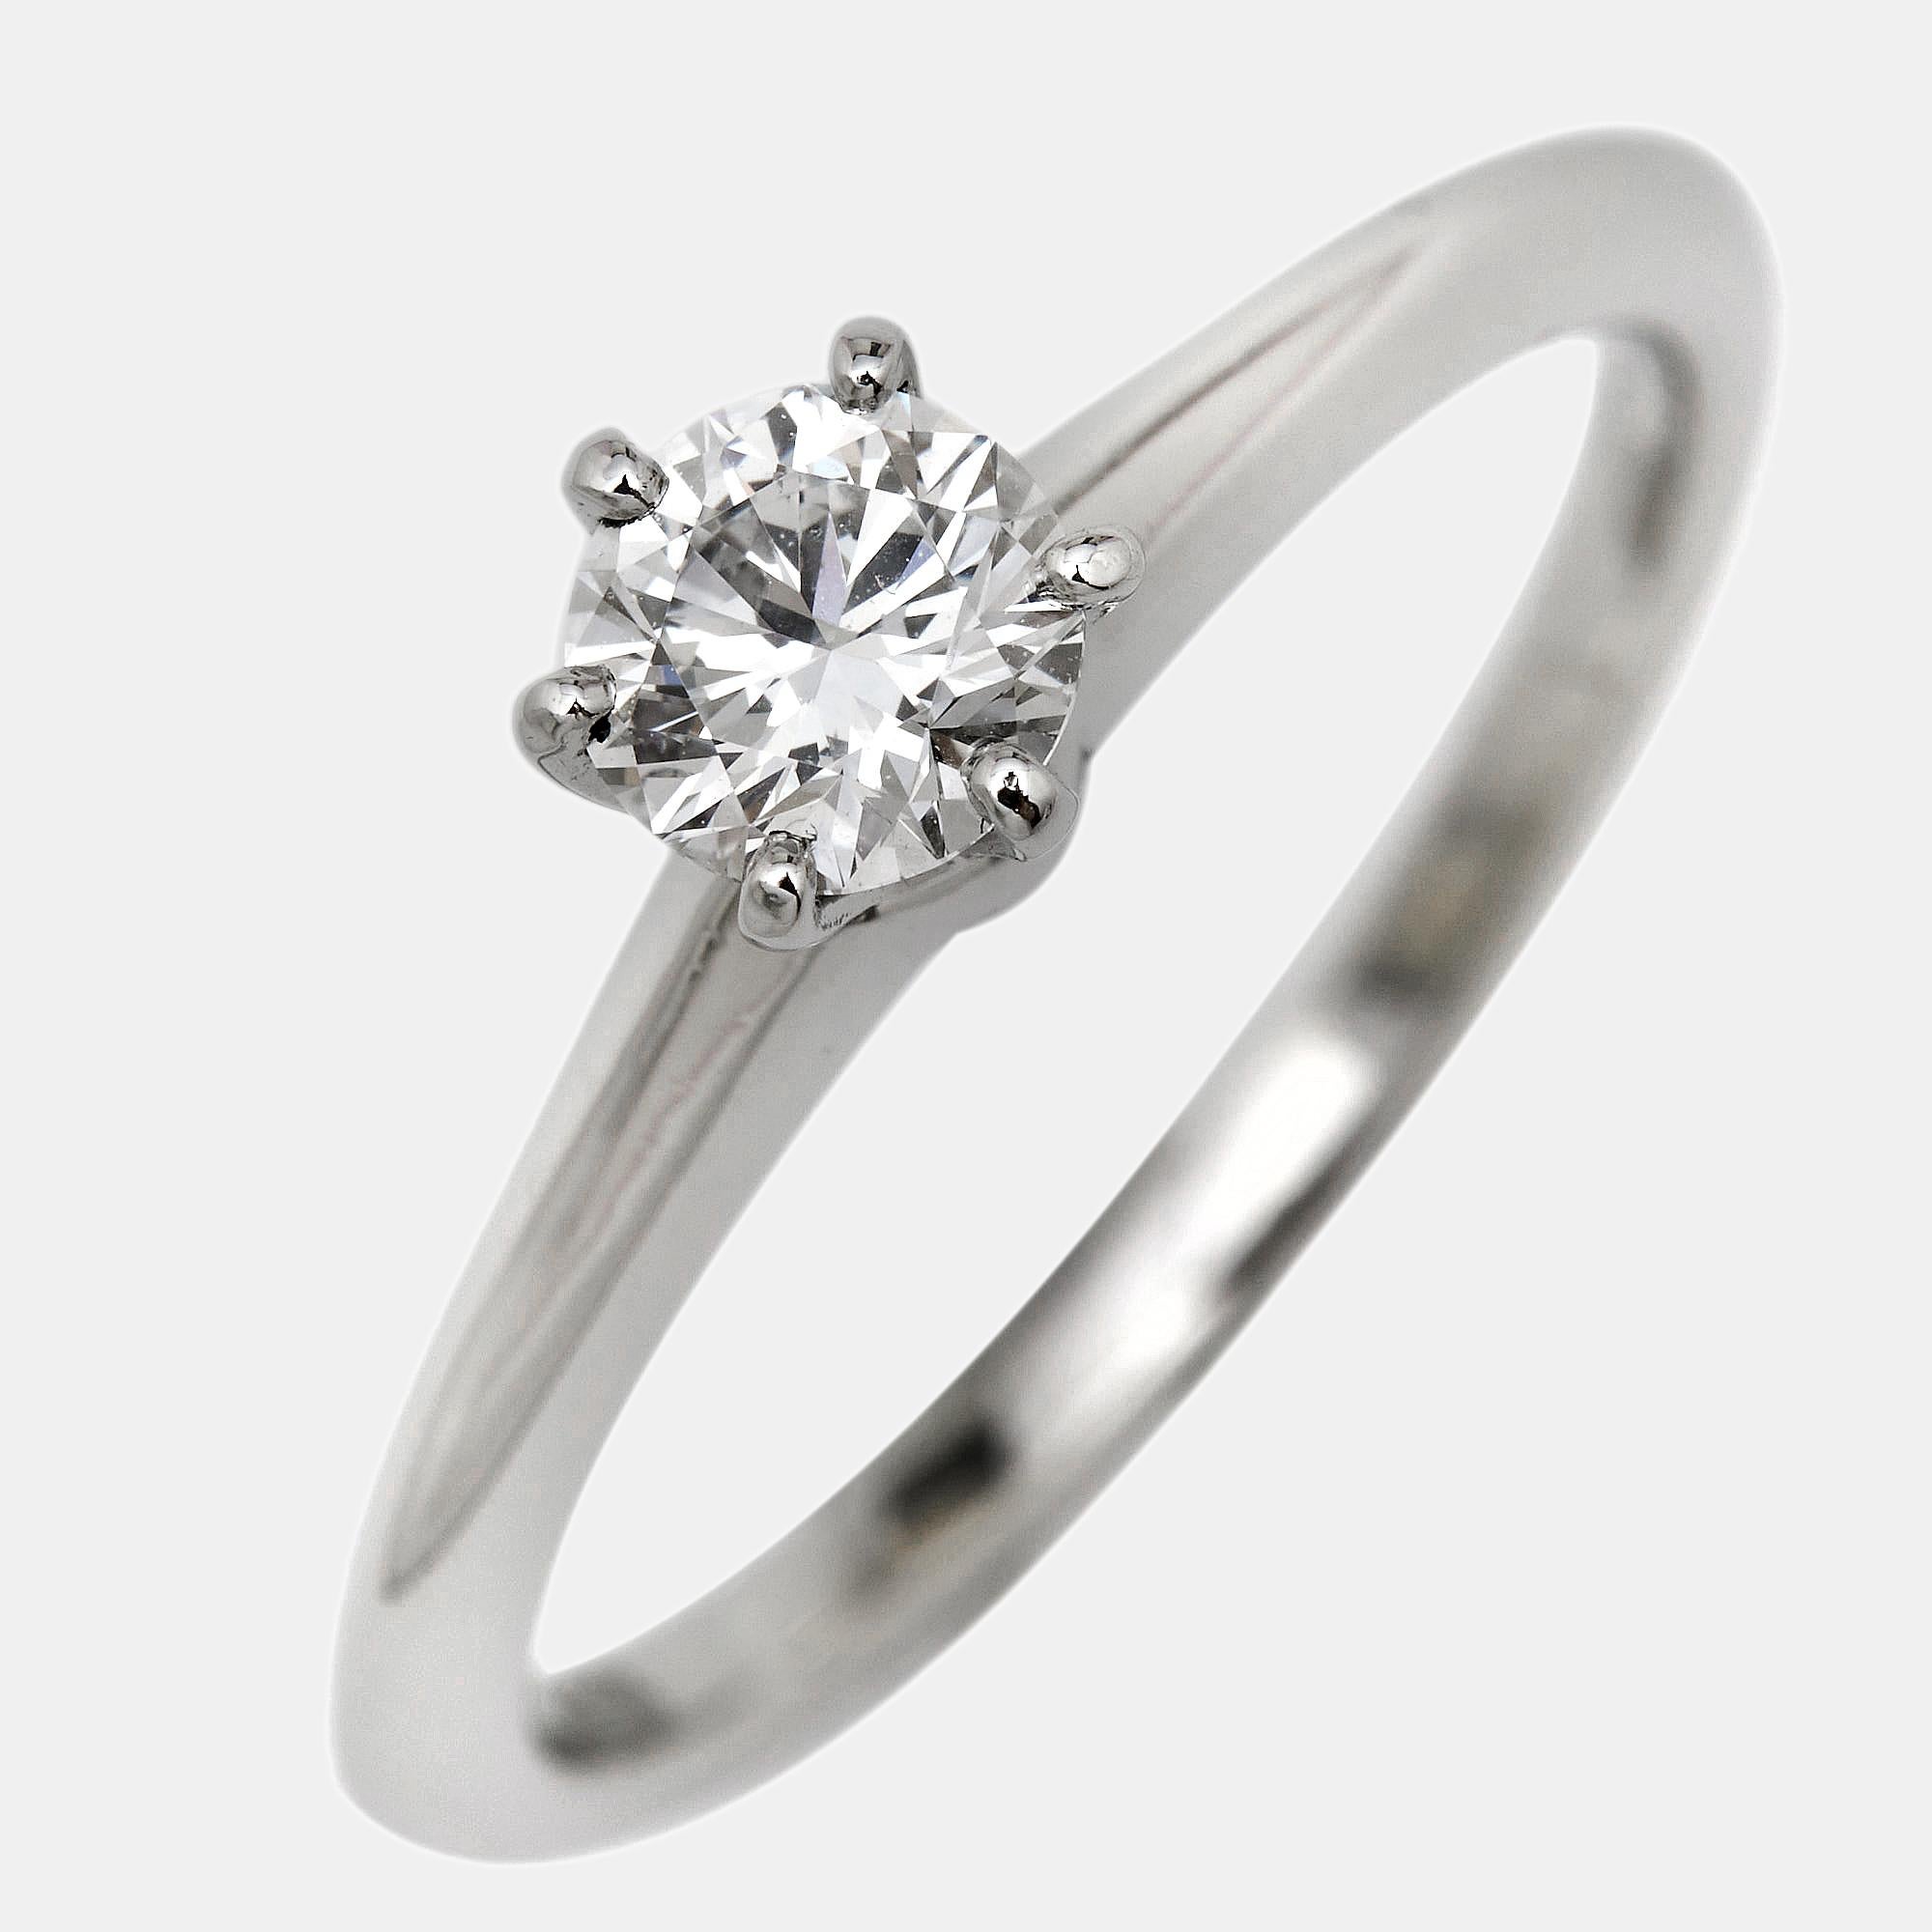 The luxury powerhouse jewelry brand–Tiffany & Co. brings you a diamond engagement ring that is crafted to make your day special while also symbolizing your romantic commitment. It has a smooth platinum body with a glamorous centerpiece that is made